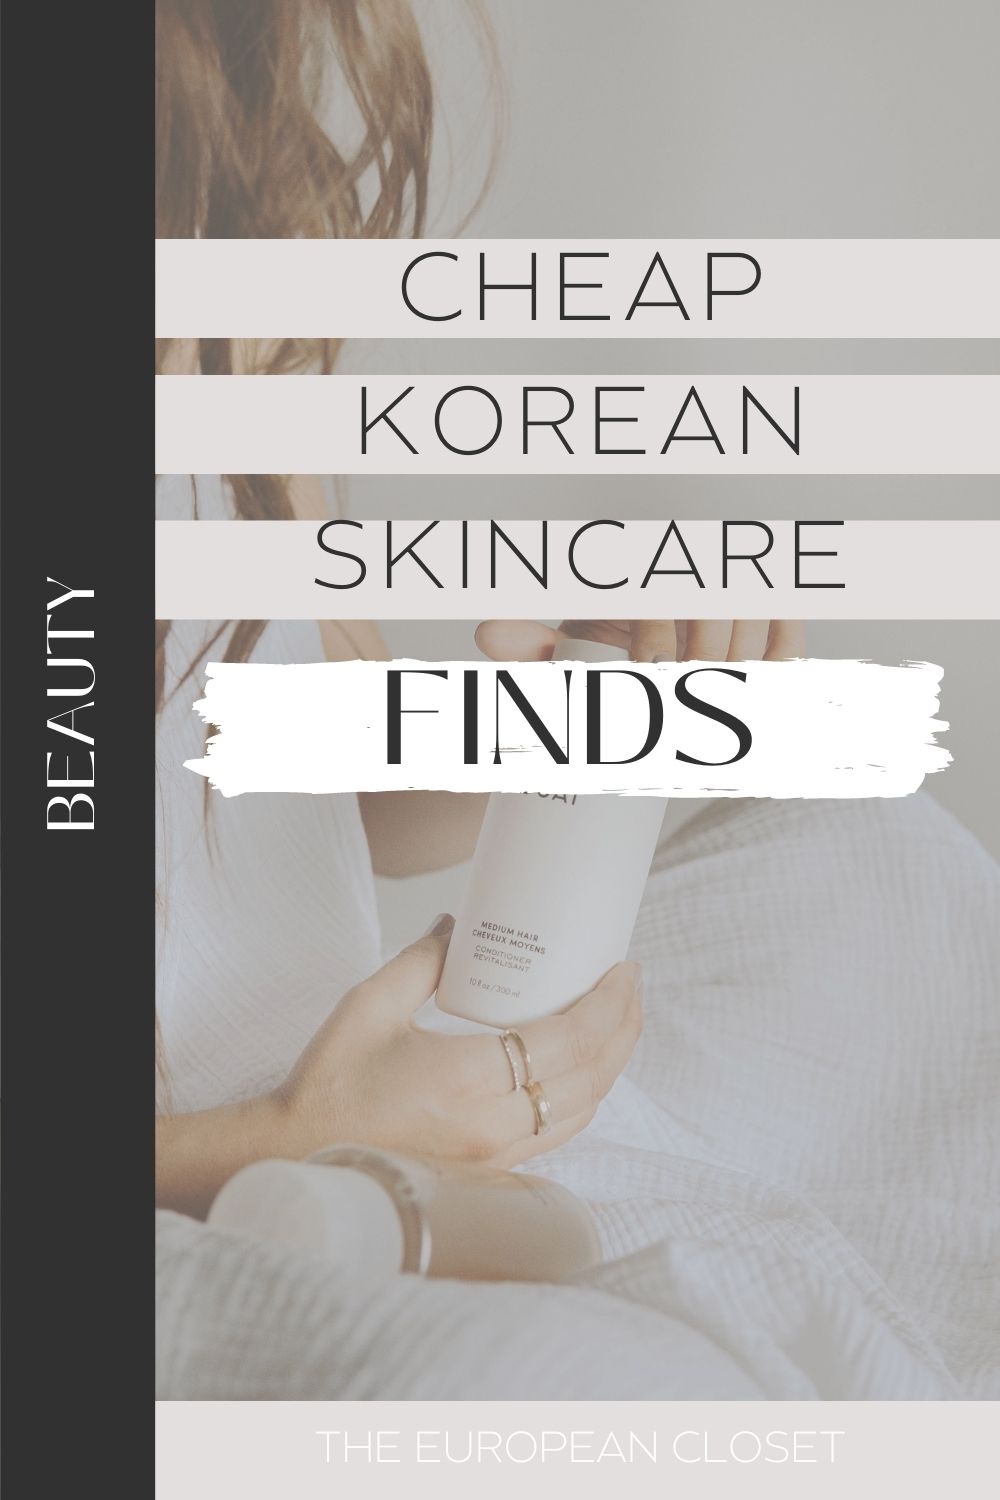 Let’s talk about cheap Korean skincare! Today I thought I would share the best and cheapest Korean skincare you can buy today and get that glass skin you've always wanted.